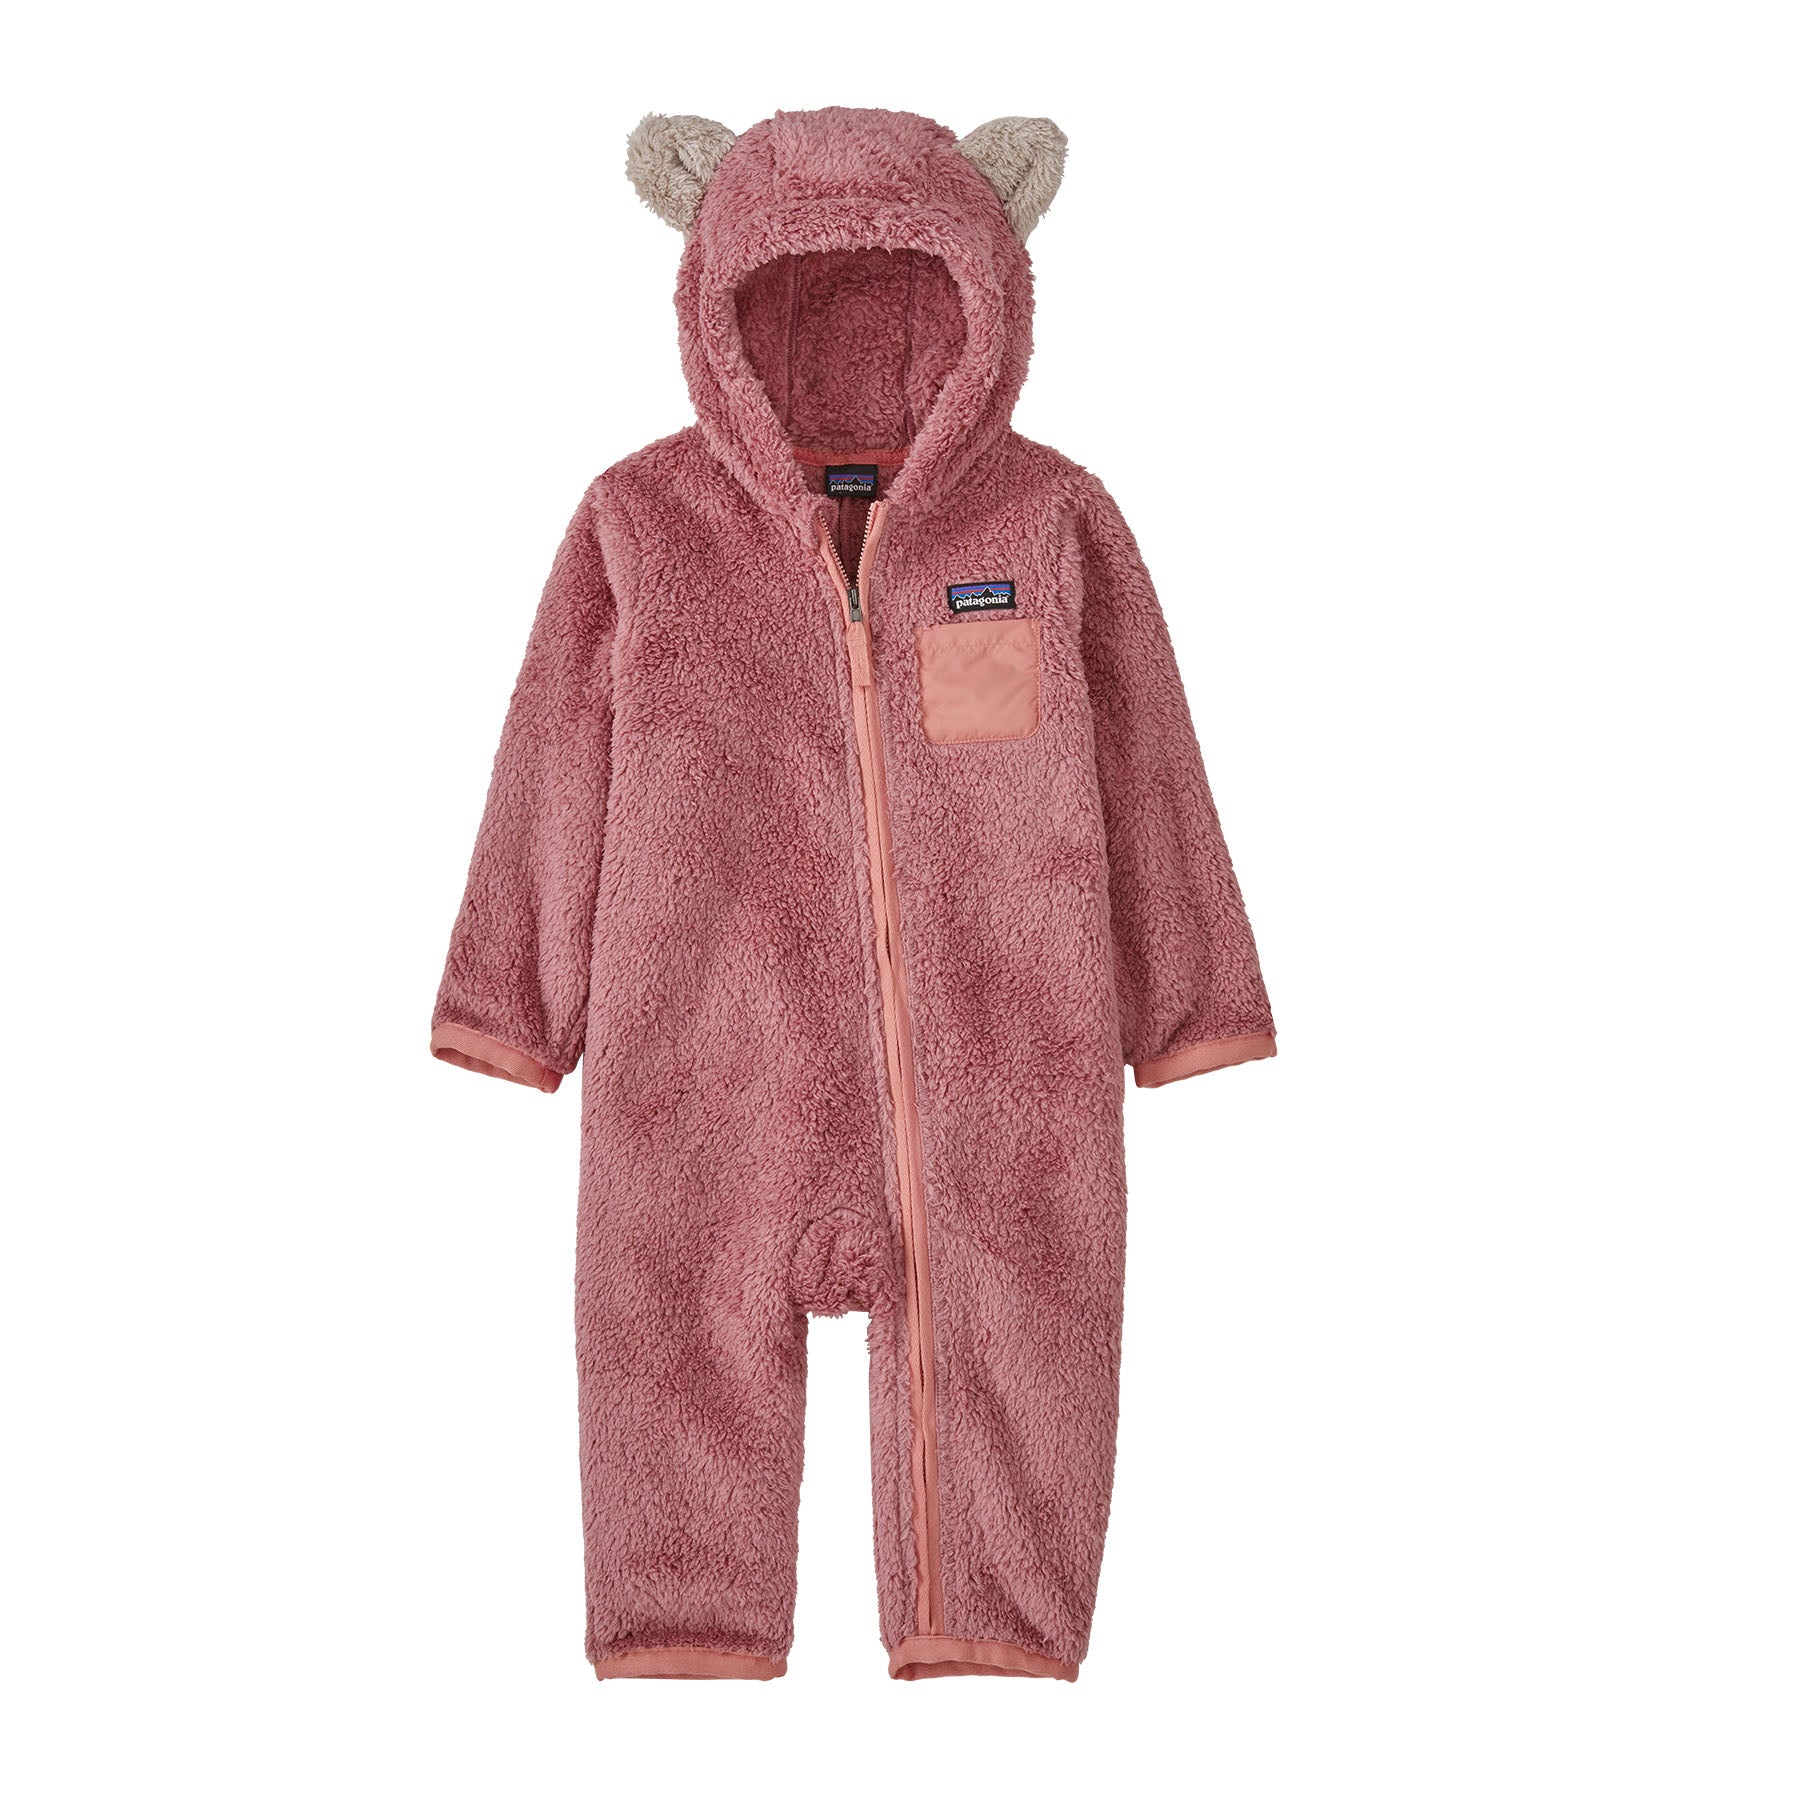 Patagonia Baby Furry Friends Bunting - Fall 2022